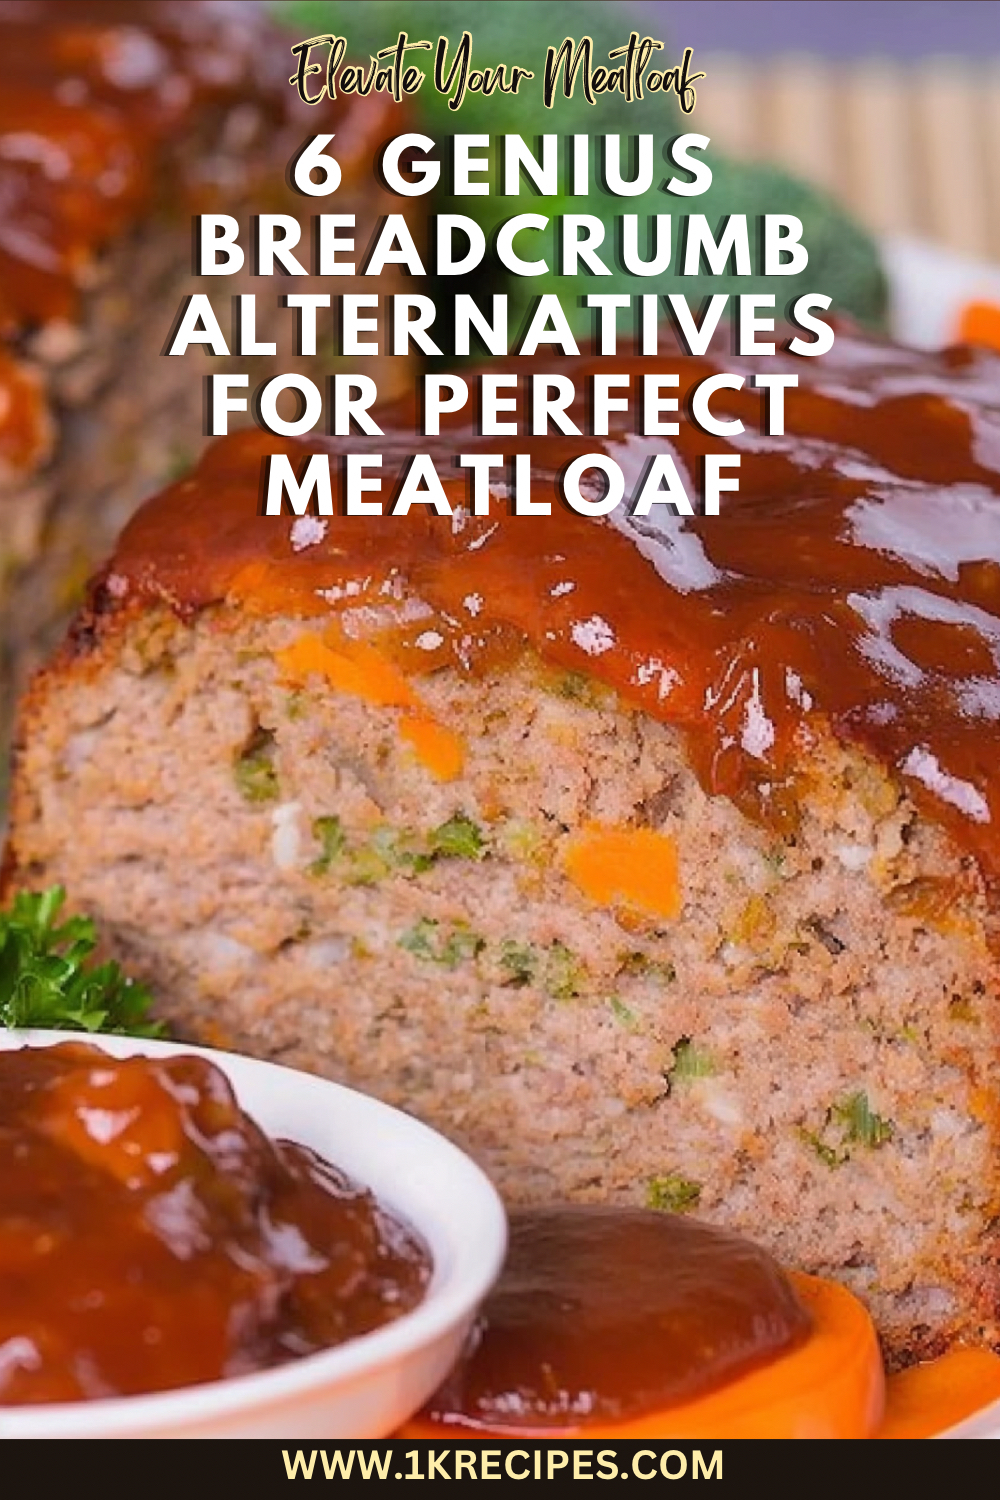 Discover six innovative substitutes for breadcrumbs in meatloaf that will transform your cooking! Perfect for anyone looking to spice up their meal with easy, delicious alternatives. Pin now for culinary inspiration!